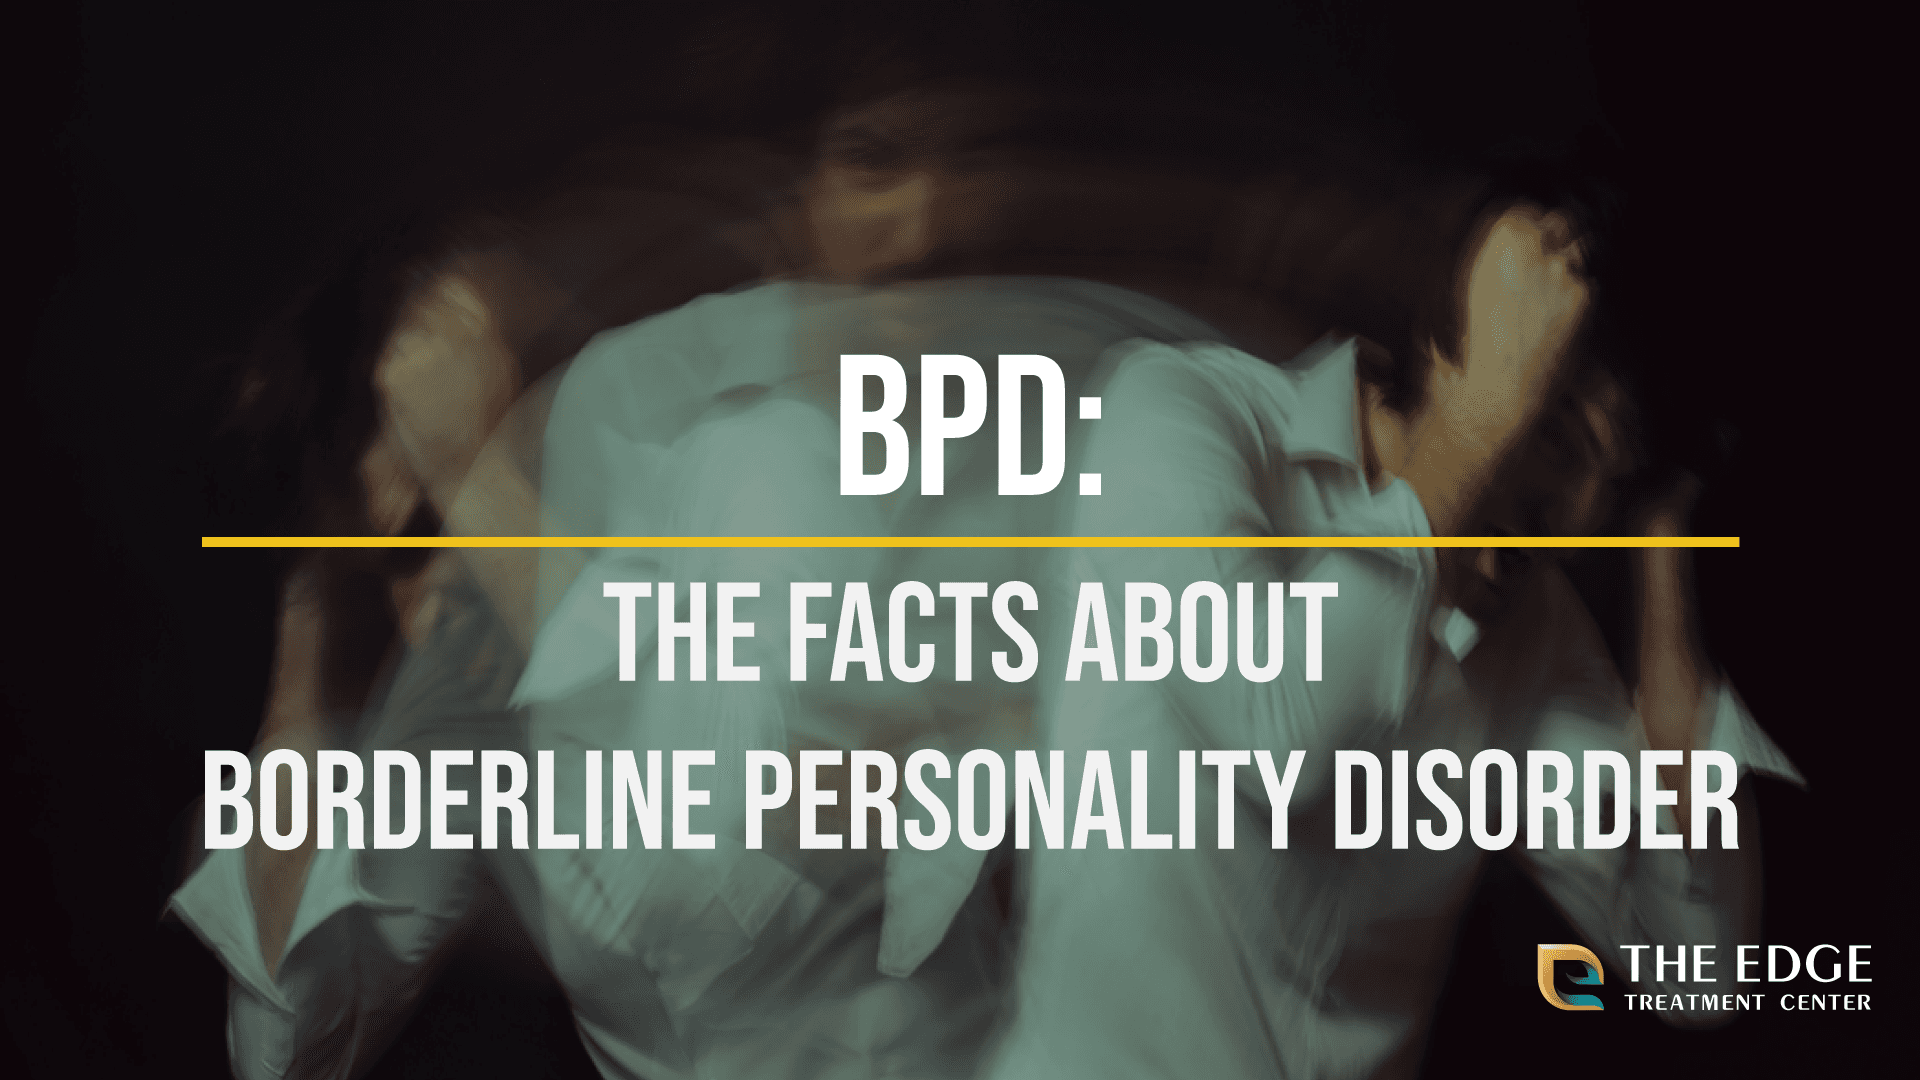 ADHD and (BPD) Co-Occurrence